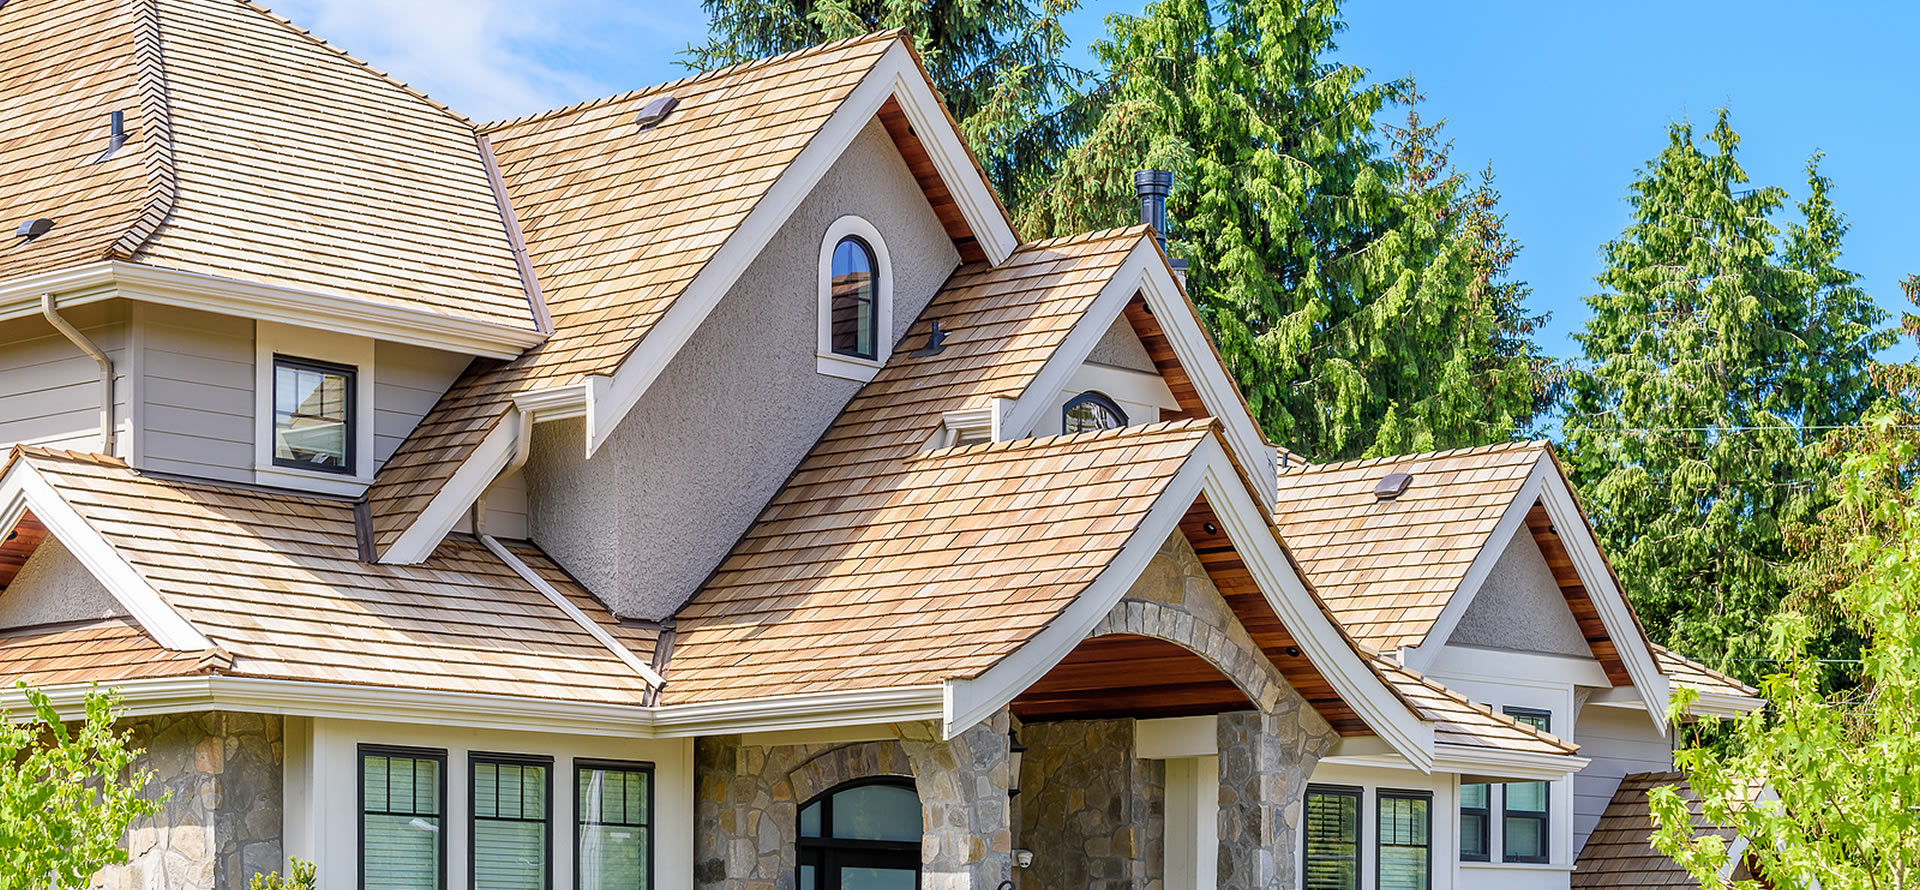 Why You Should Be Wary of Low Roofing Bids